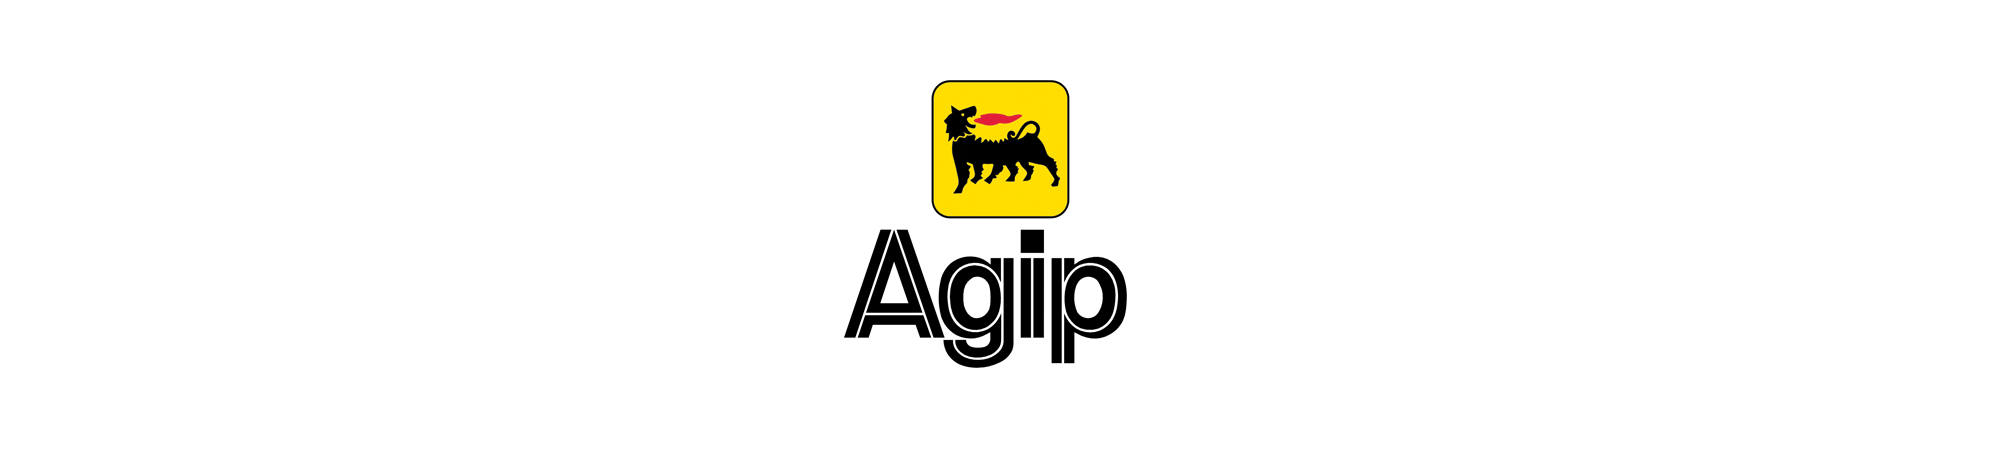 agip.png